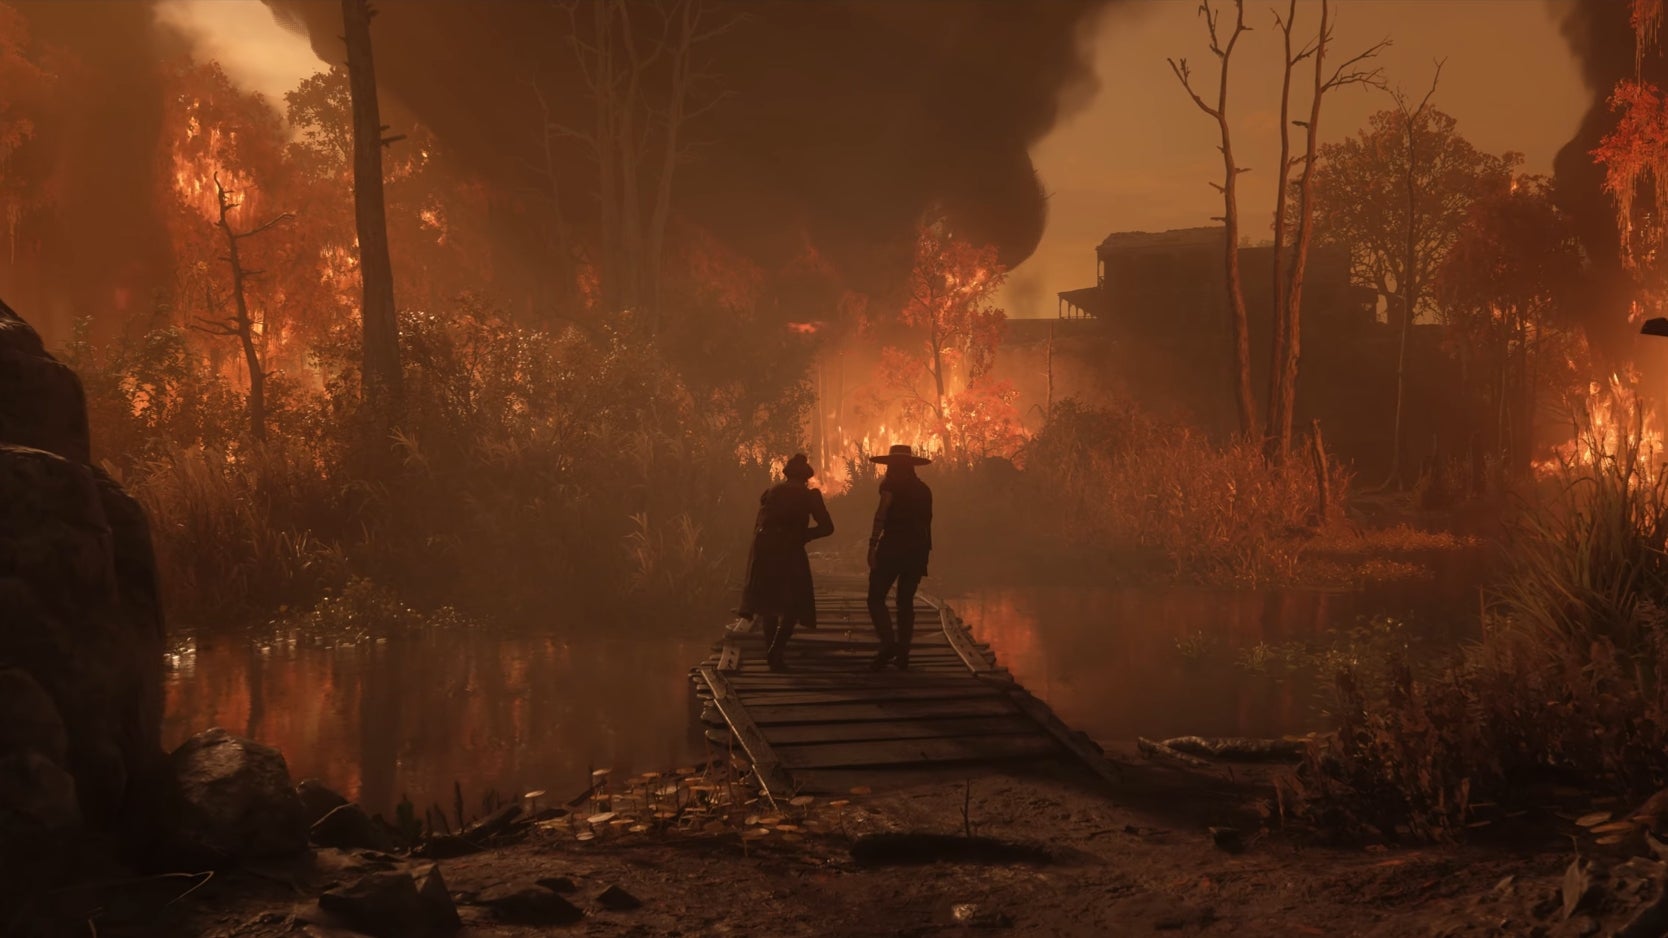 Hunt Showdown’s upcoming event will set the world on fire